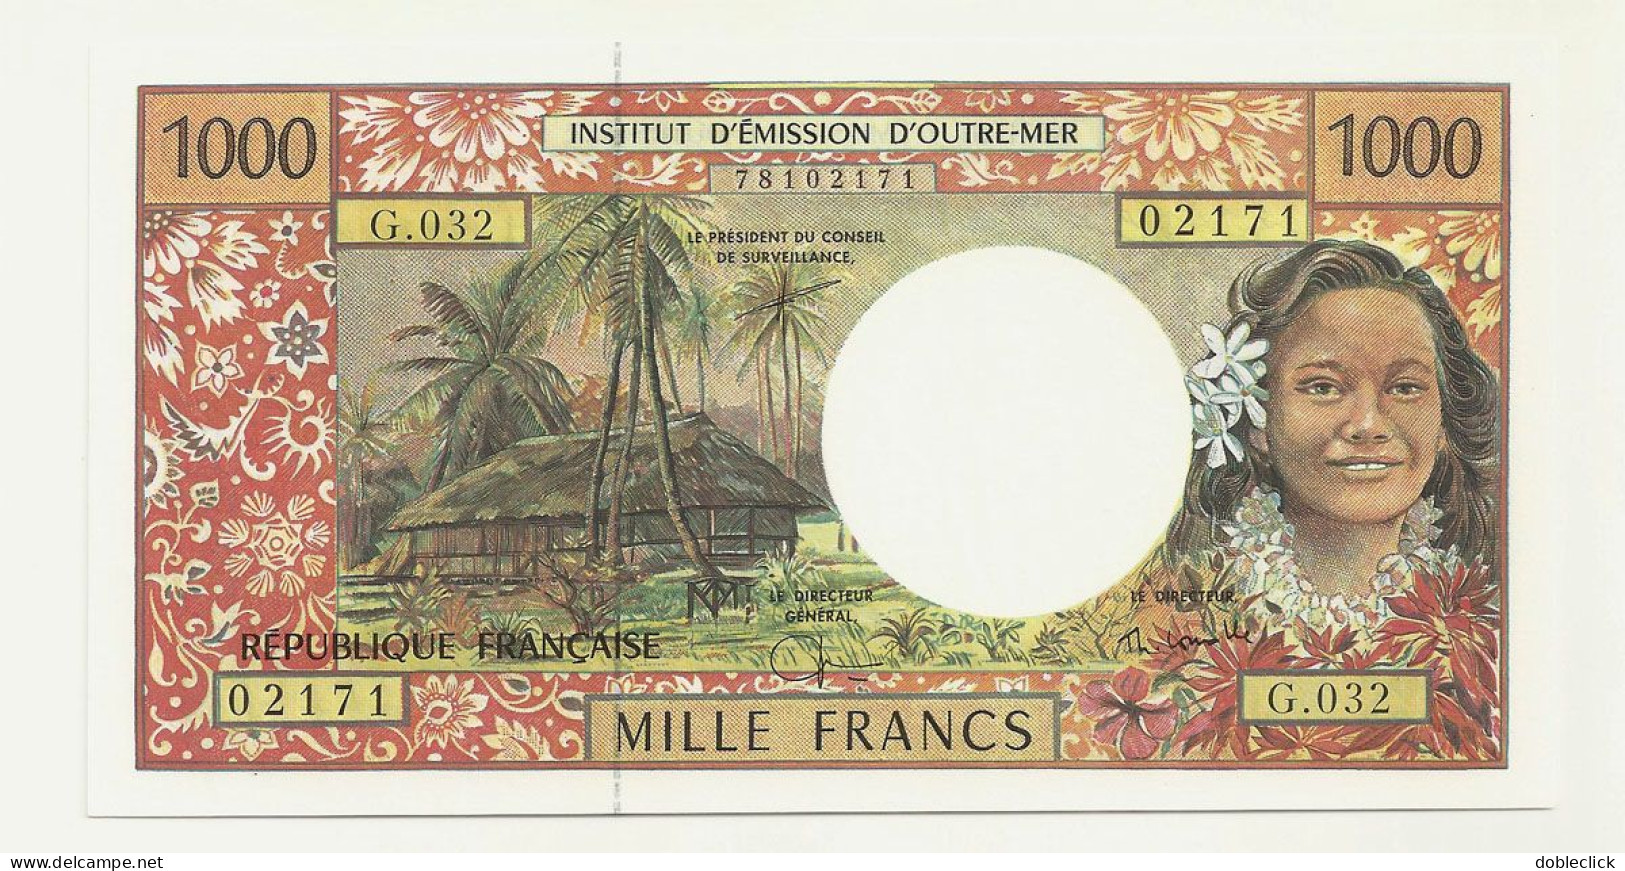 FRENCH PACIFIC TERRITORIES POLYNESIA 1000 FRANCS ND P-2h (2004) UNC - Territorios Francés Del Pacífico (1992-...)